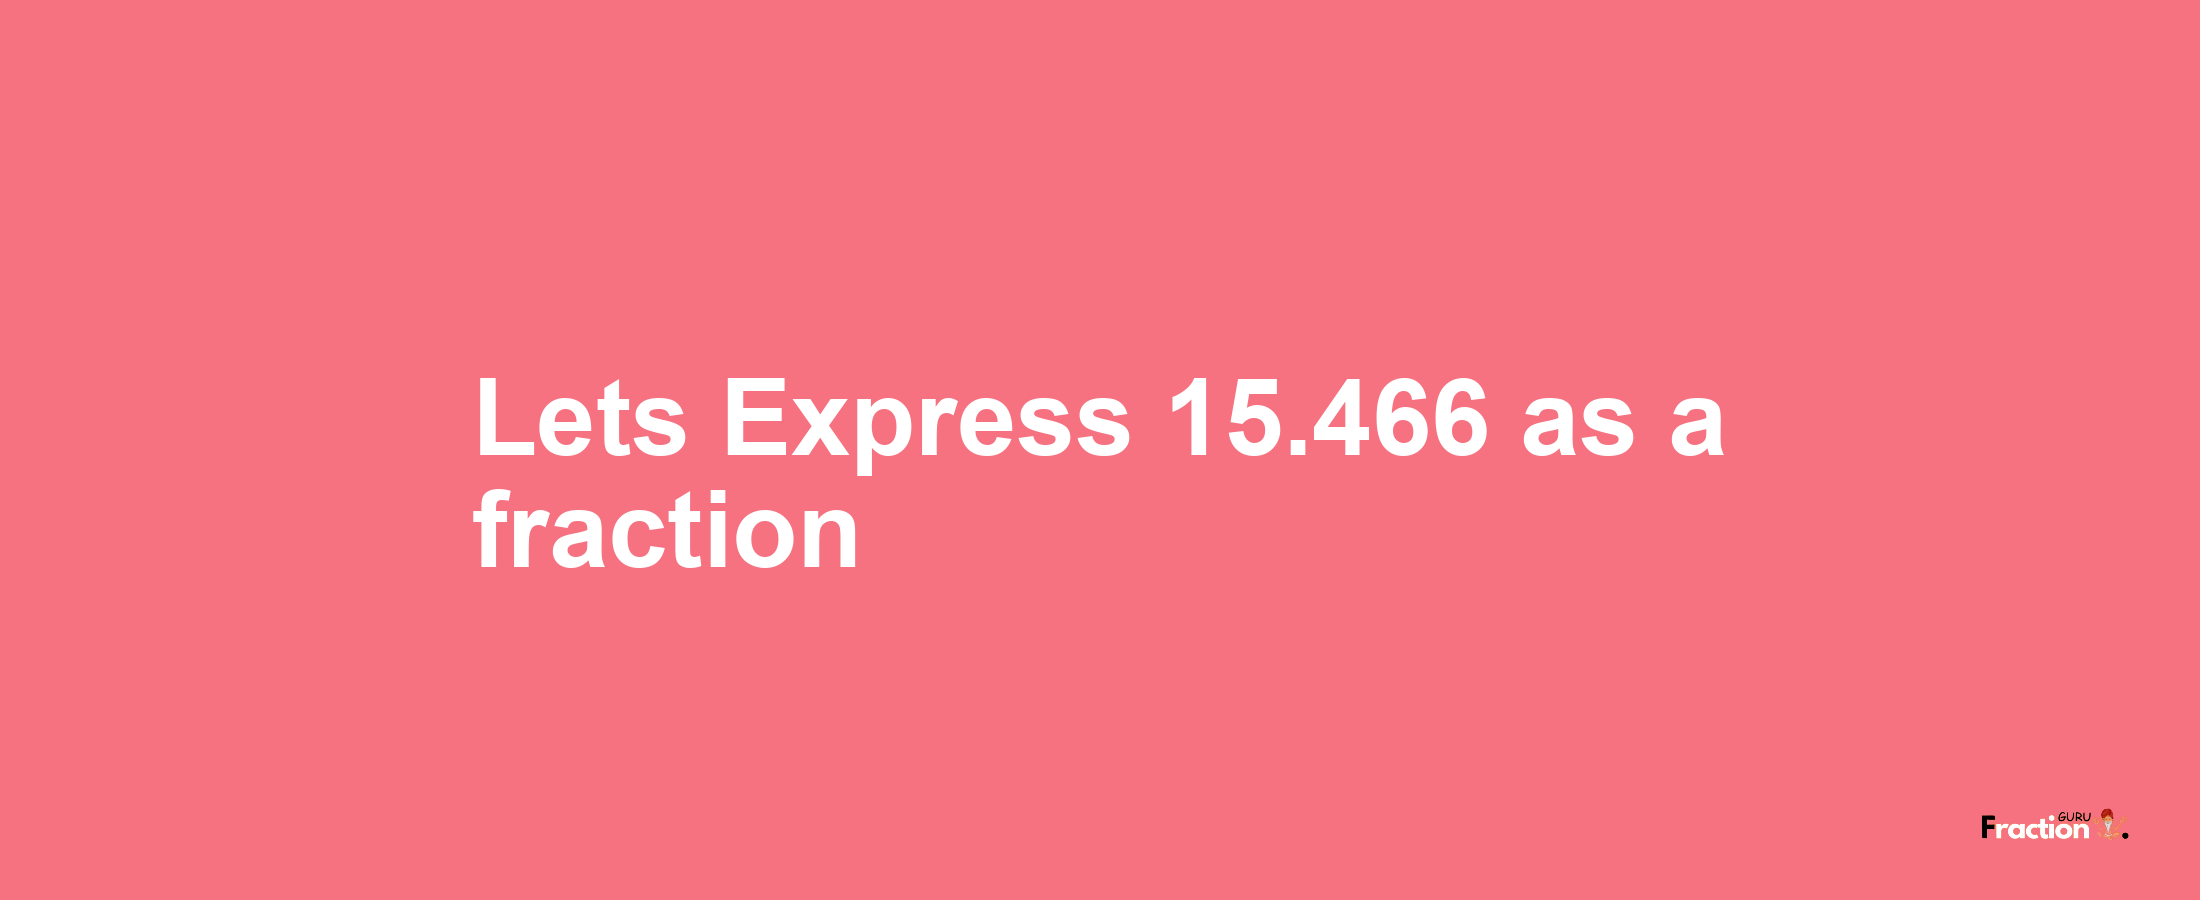 Lets Express 15.466 as afraction